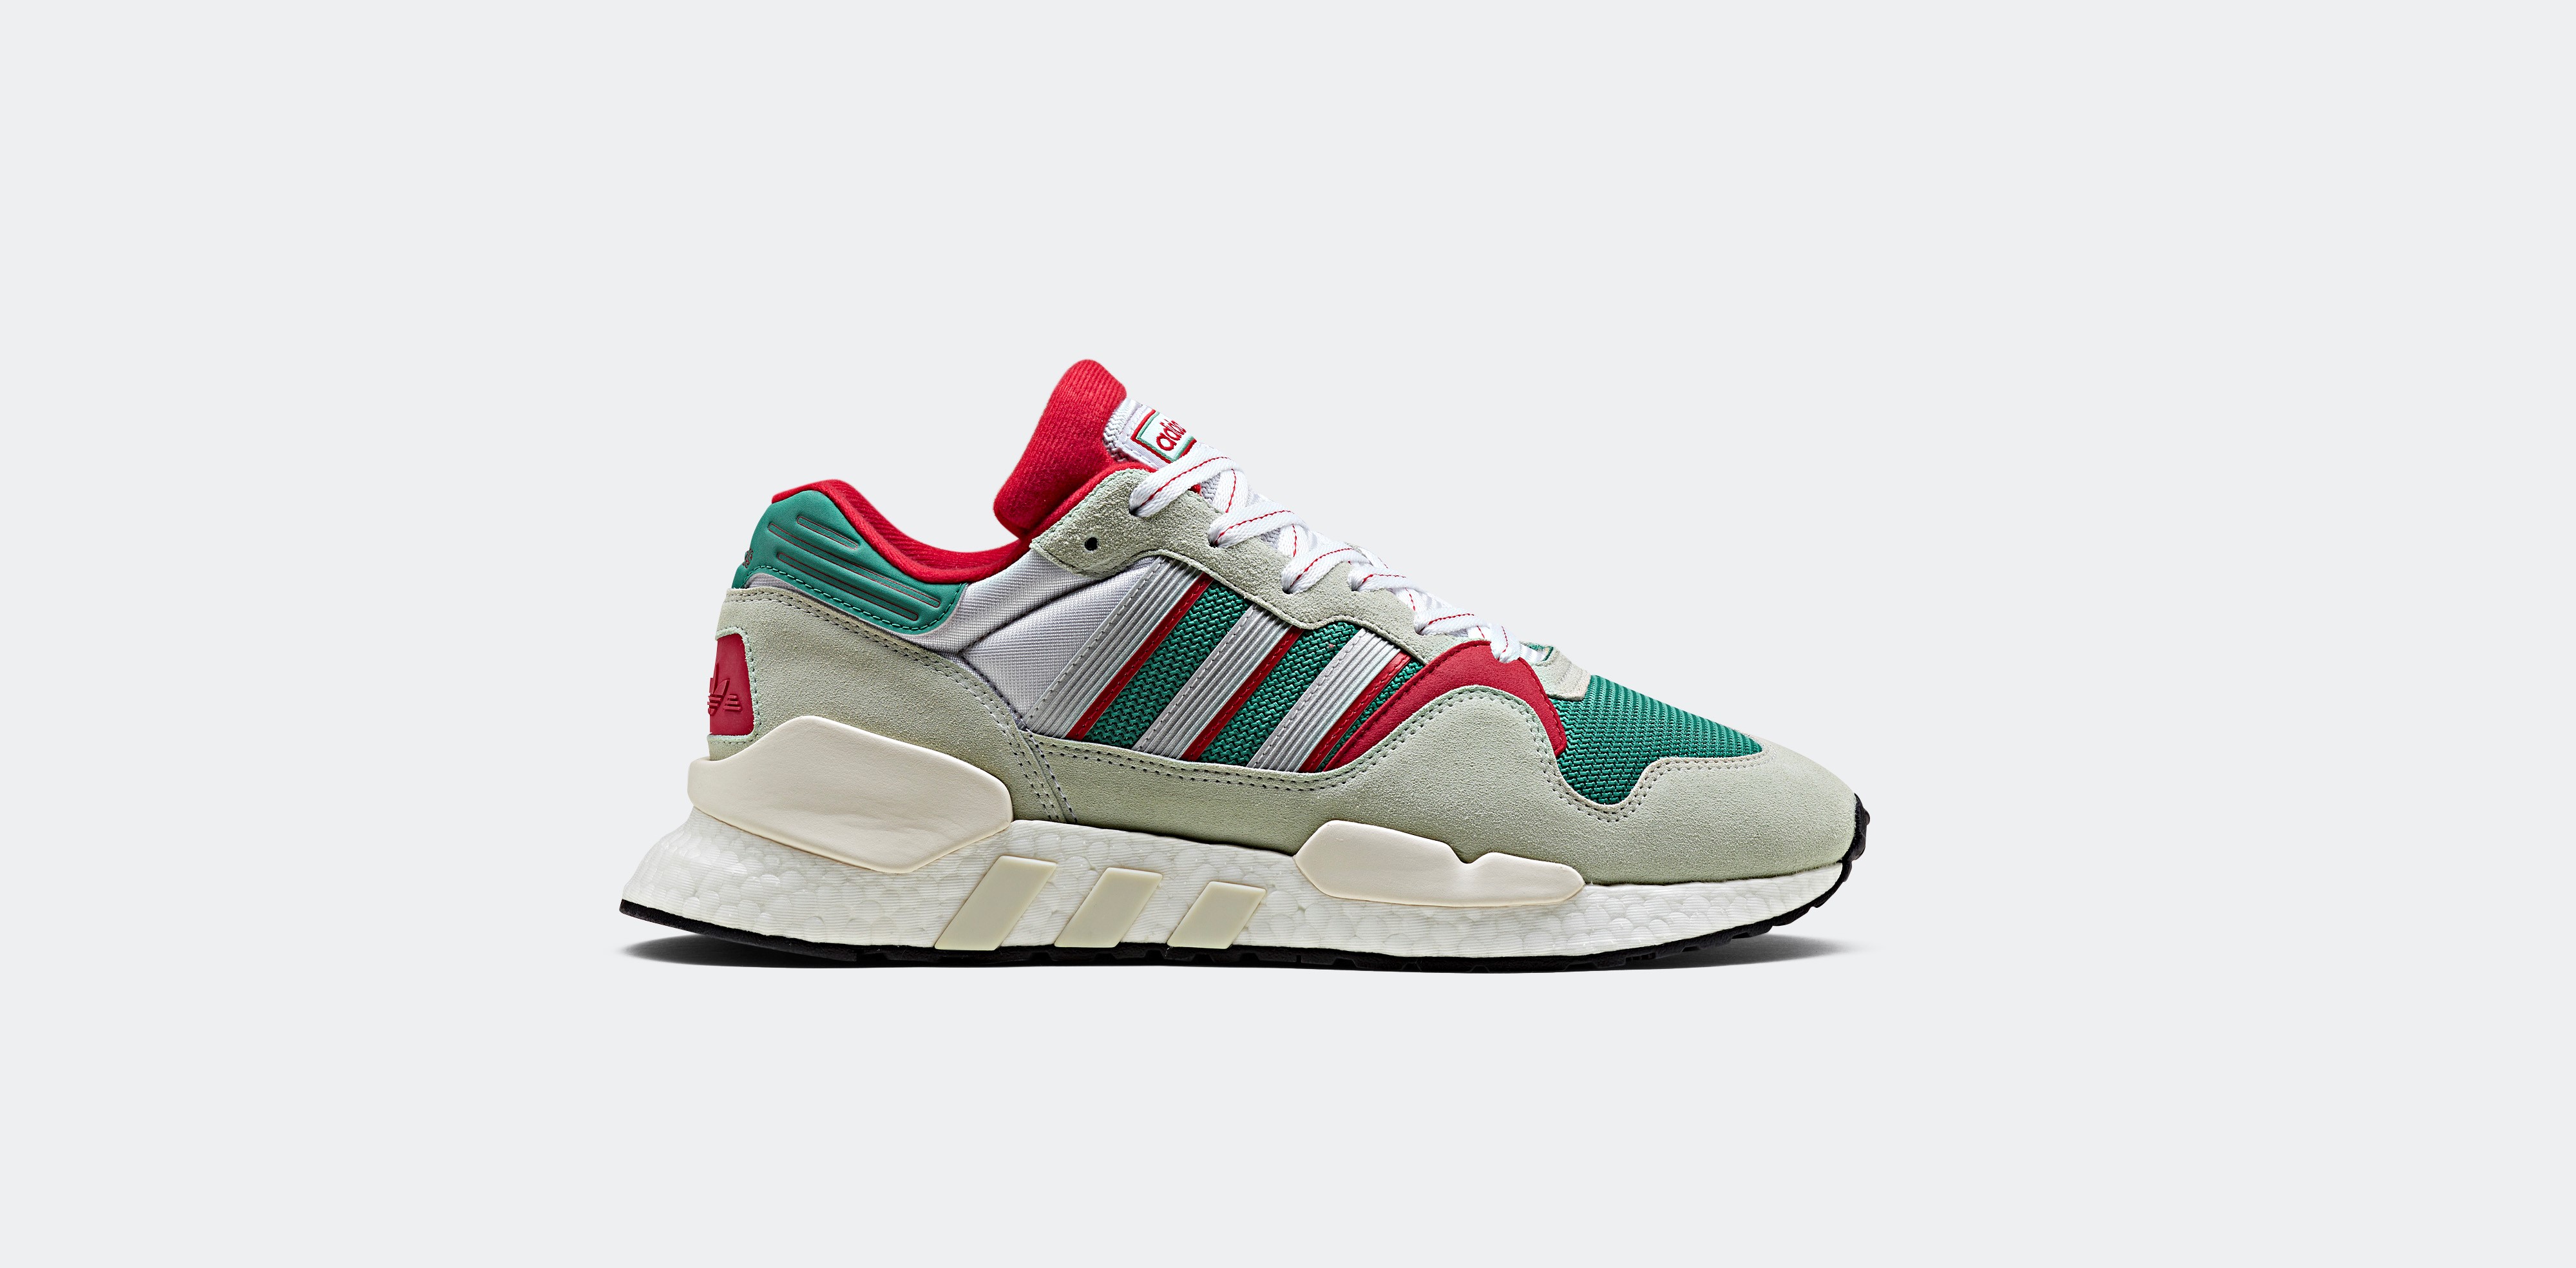 adidas ZX930xEQT never made - WearTesters